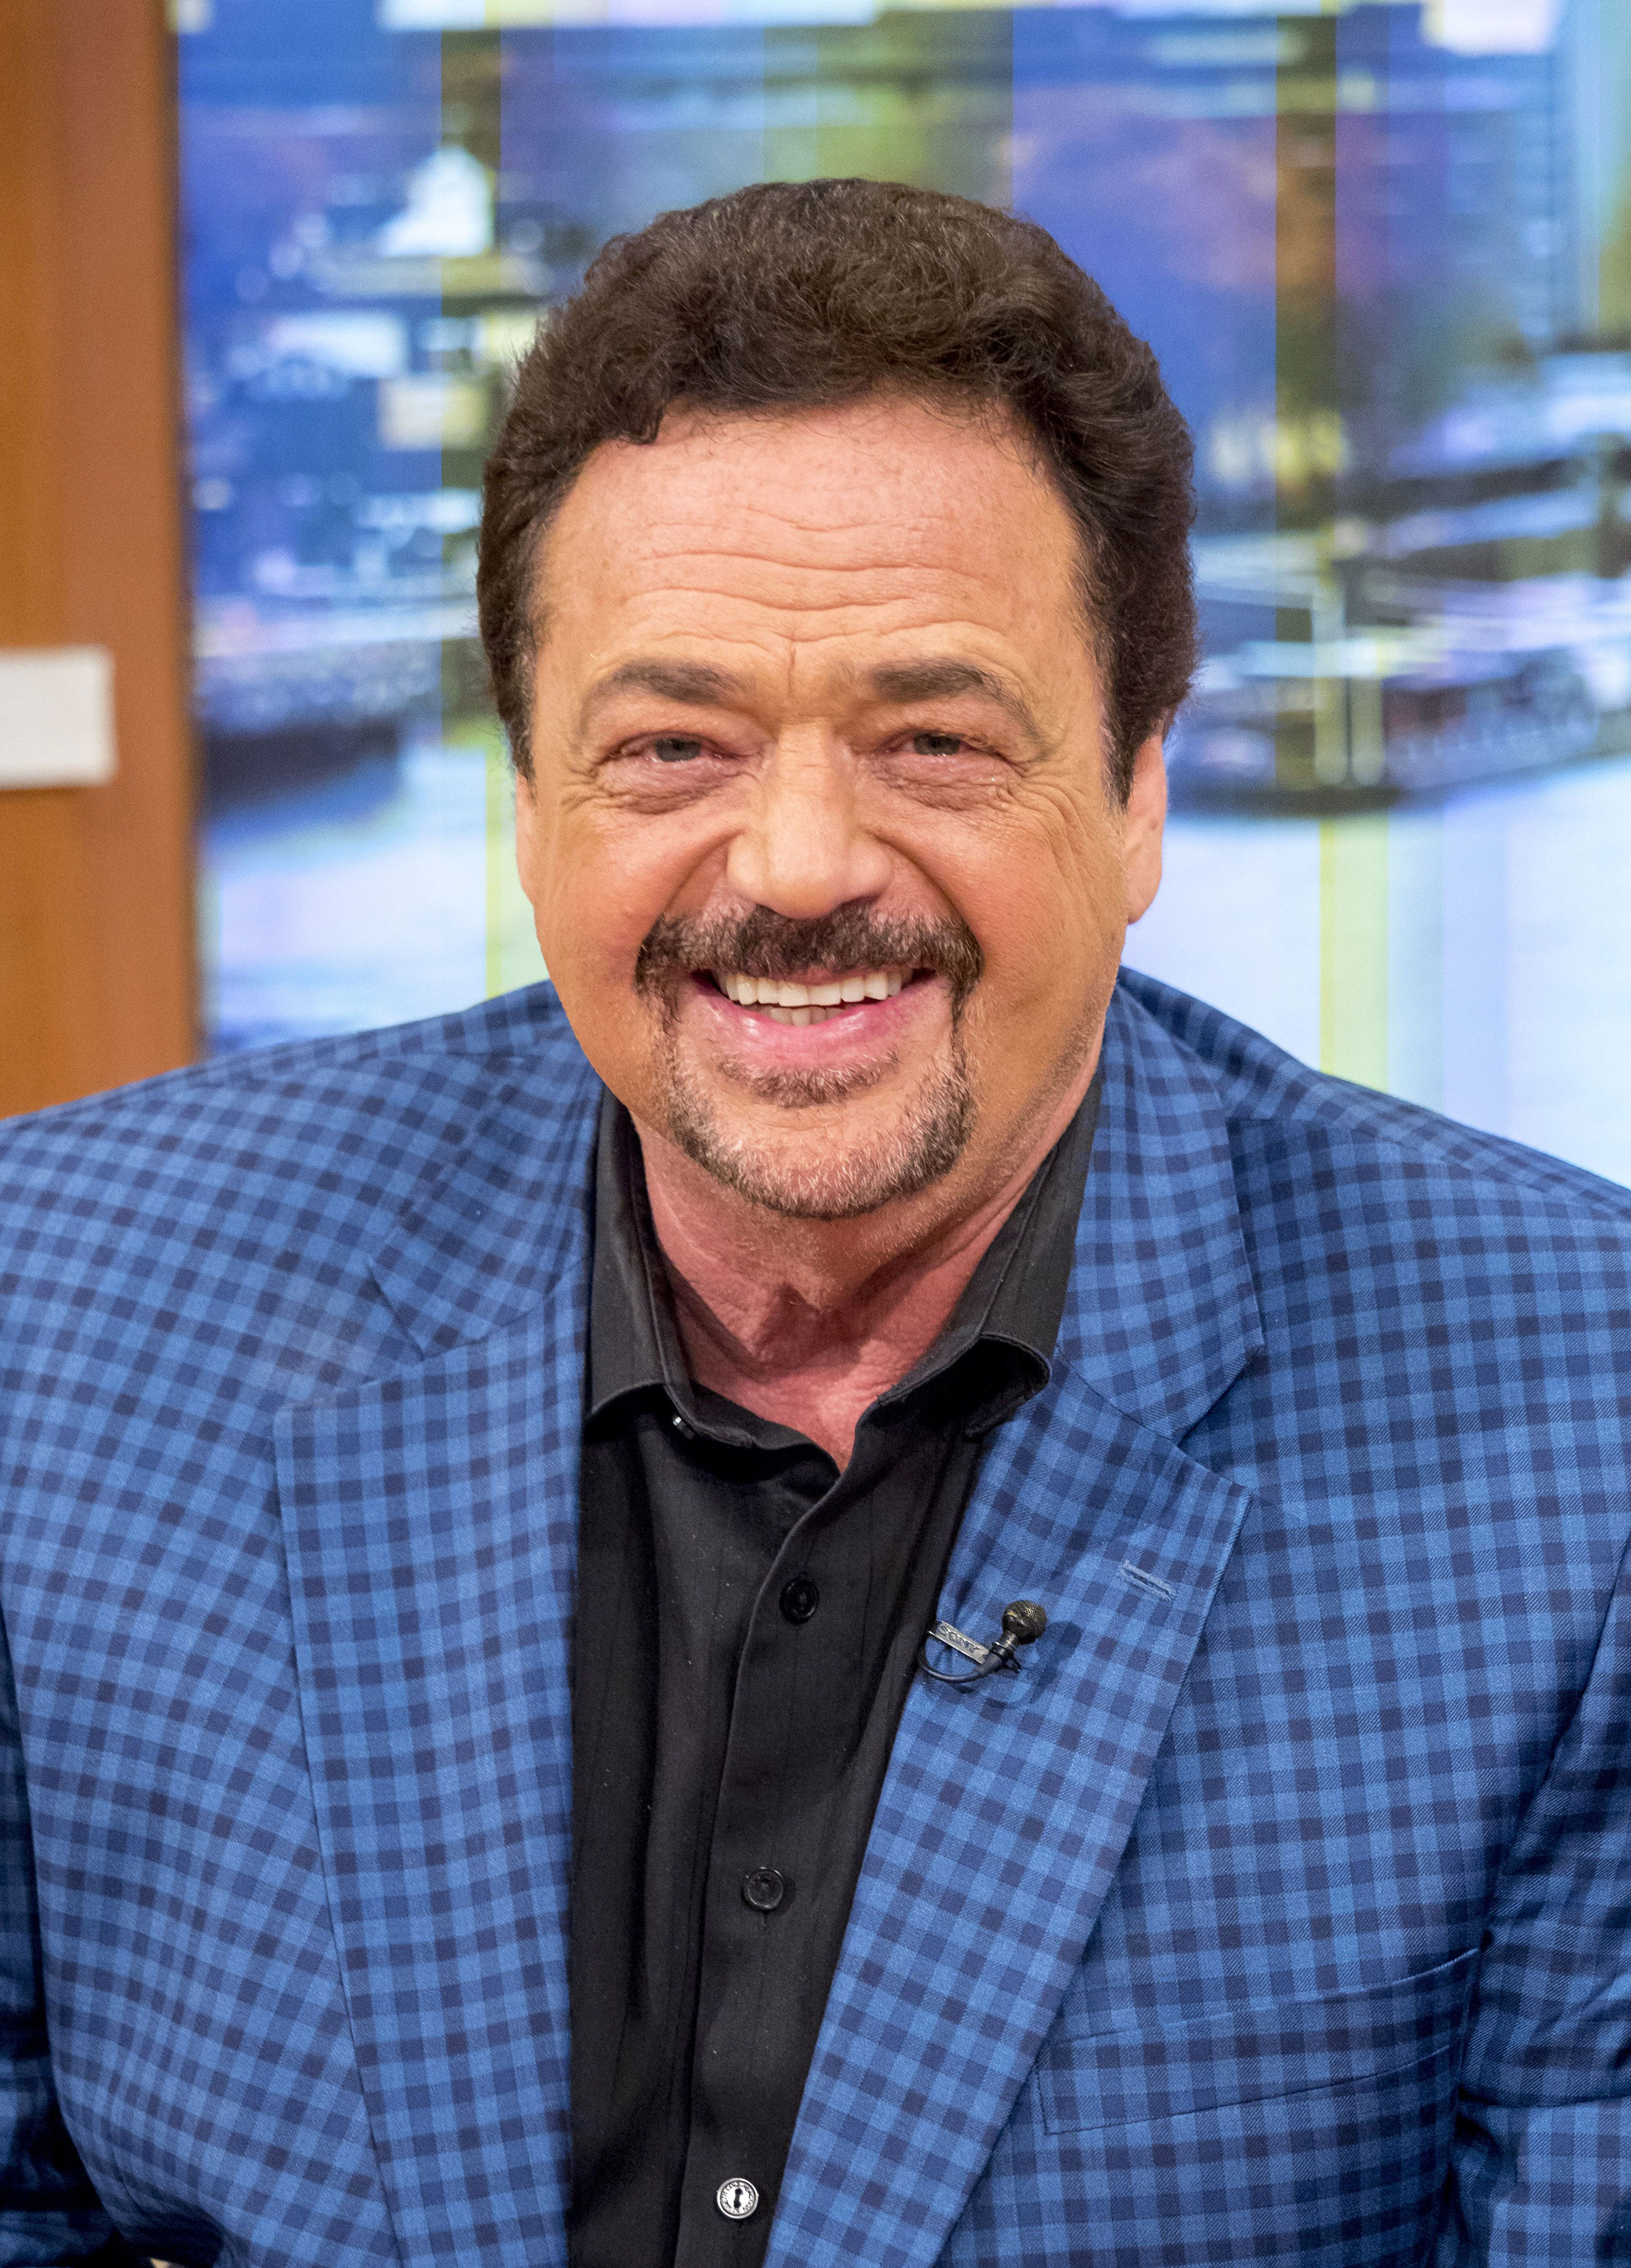 <p>Once Donny Osmond went solo, Jay Osmond teamed up with brothers Merrill Osmond and Wayne Osmond to move into the world of country music in the '80s. In 1987, he married Kandilyn Harris, with whom he shares three sons -- Jason, Eric and Marcus. The couple split in 2011 and in 2014, Jay wed second wife Karen Randall. In 2020, he took to social media to let fans know he'd suffered a mini stroke but was recovering.</p><p>In late 2024, Jay and Karen will host an event called the Osmond Connection in Branson, Missouri, filled with holiday activities for fans to take part in.</p>